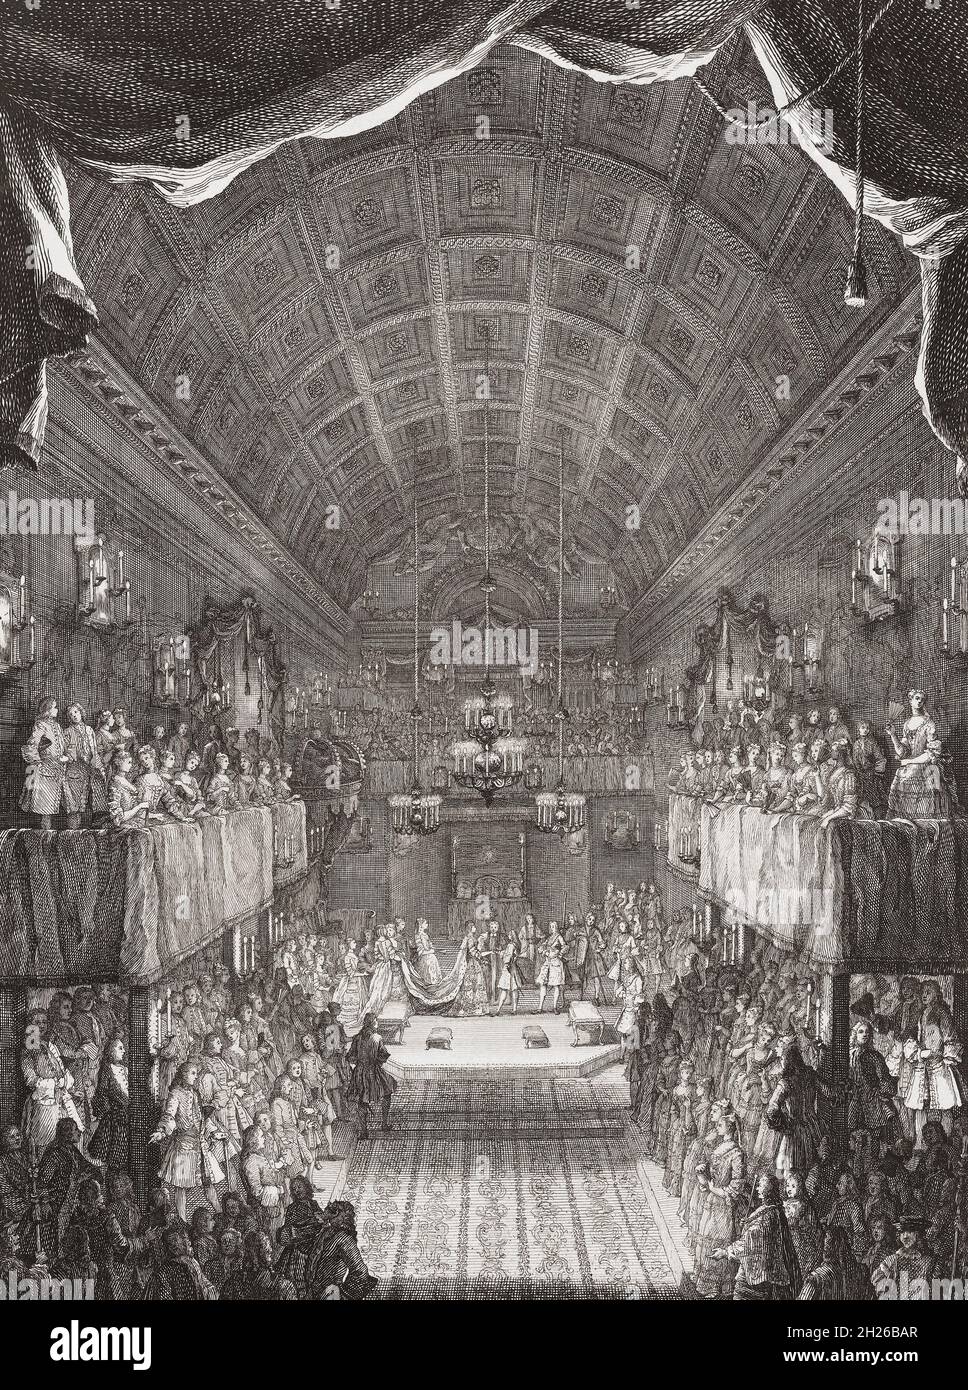 The marriage in 1734 of Anna, Princess Royal and Princess of Orange to William IV, Prince of Orange in the Chapel Royal at St. James's Palace, London, England.  Anna, Princess Royal, 1709 - 1759, daughter of King George II of England.  William IV, Prince of Orange, 1711 -1751, son of John William Friso, Prince of Orange.  After an 18th century print by Jacques Rigaud from a work by William Kent. Stock Photo